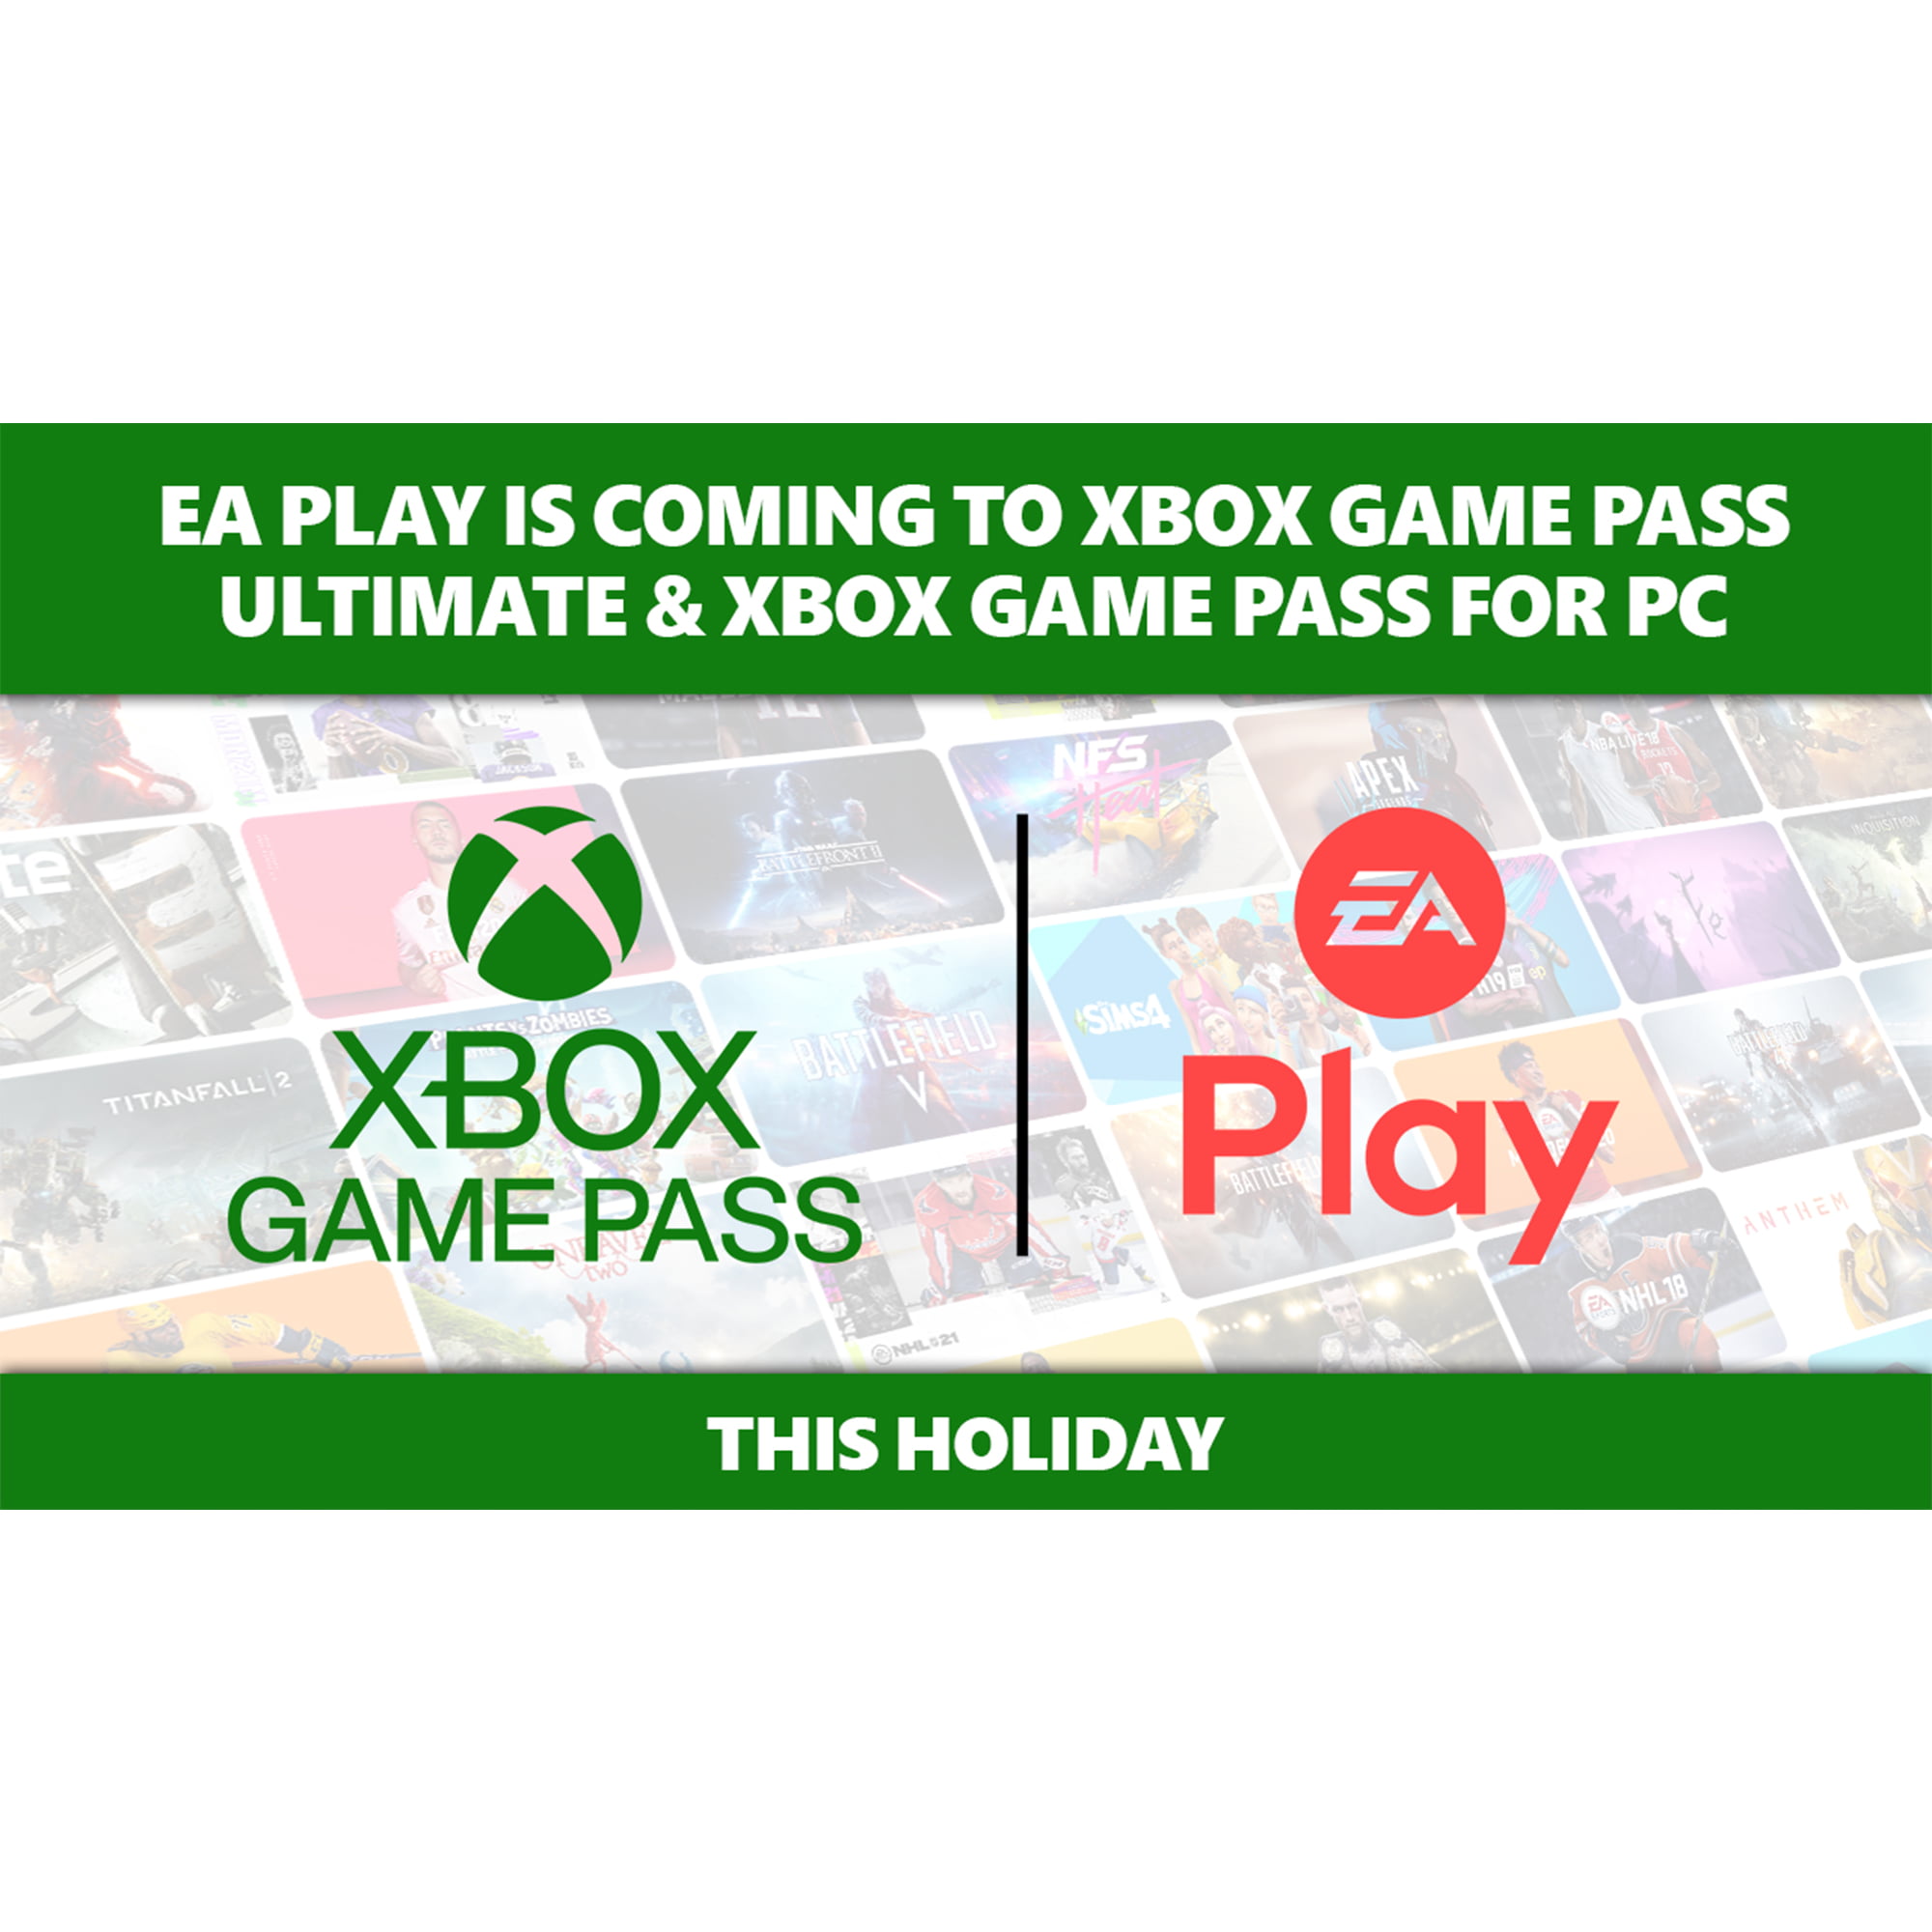 xbox game pass gift card 1 year